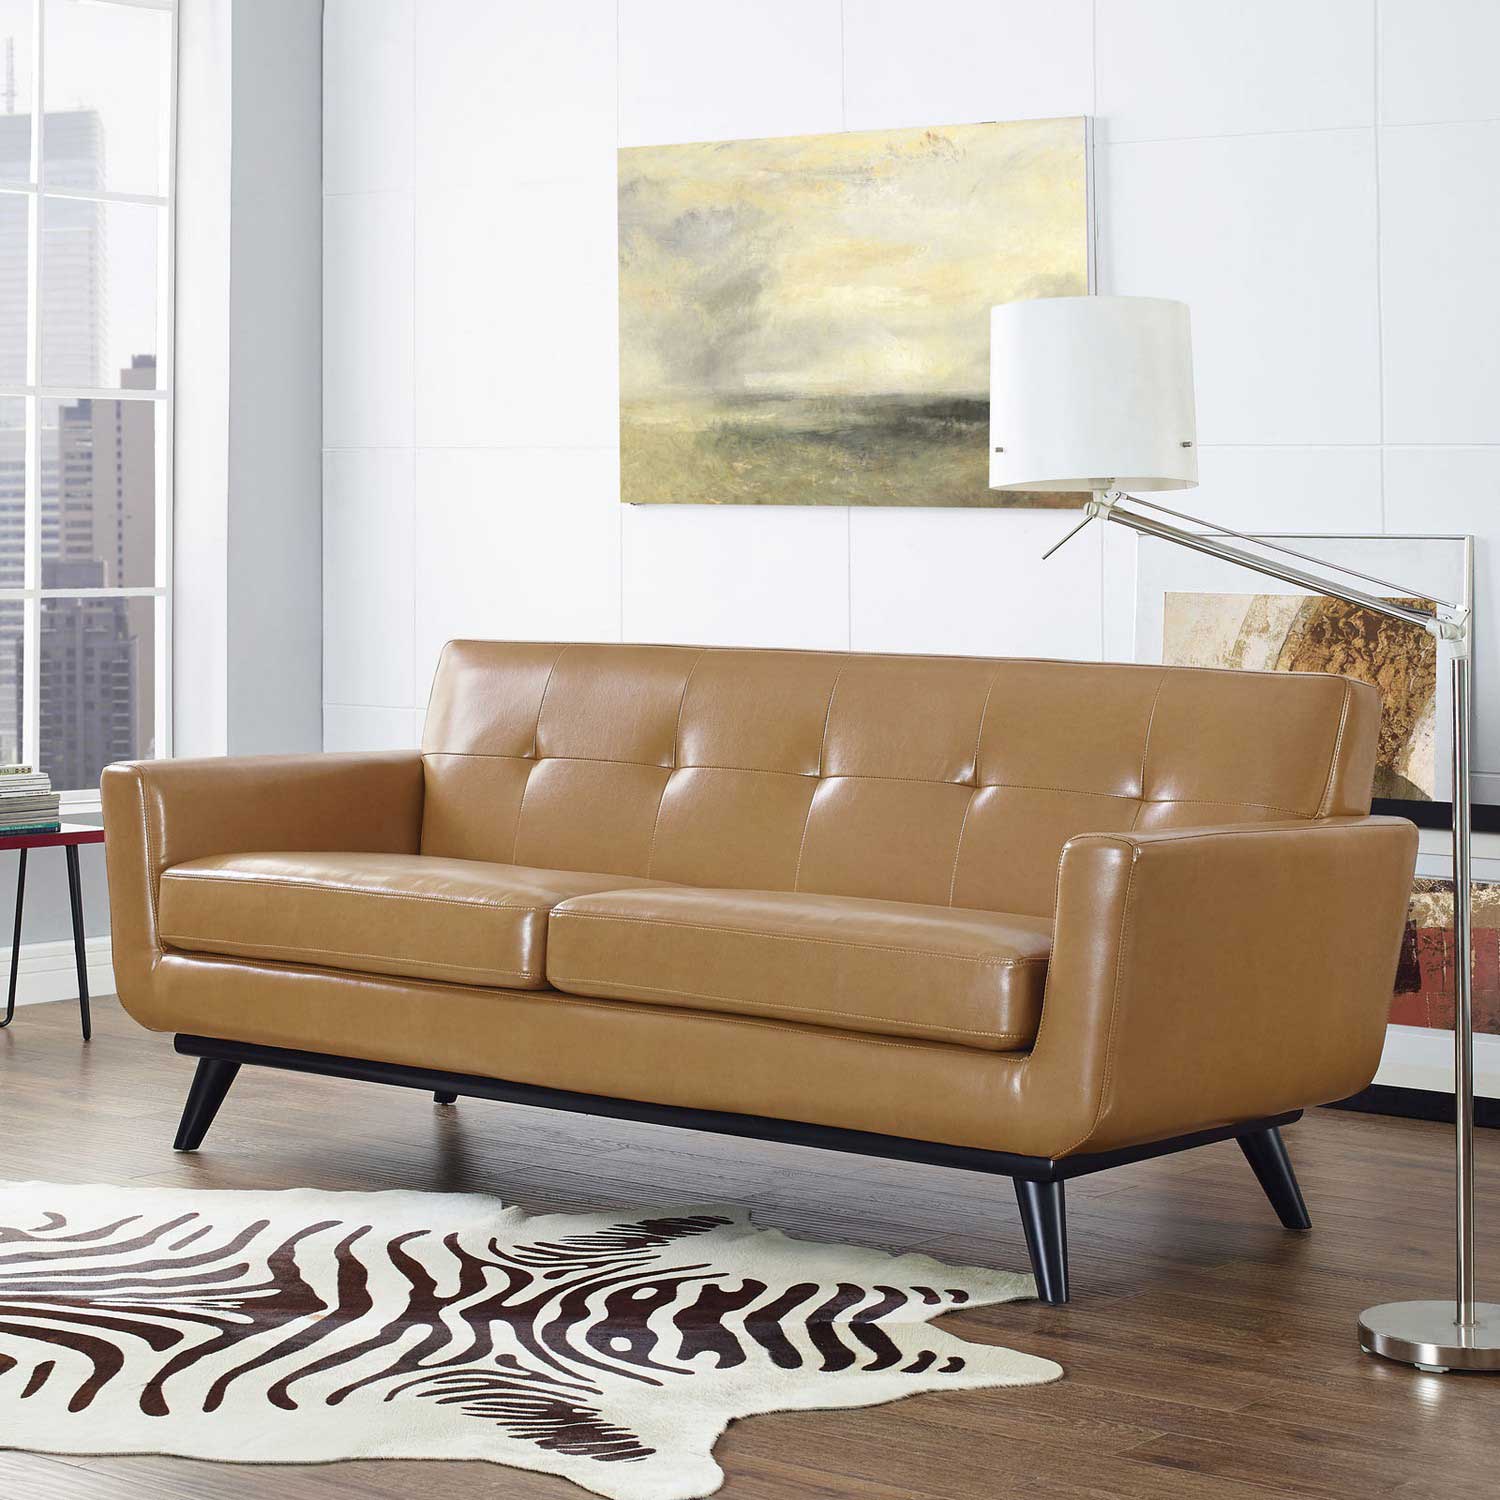 Modway Engage Bonded Leather Loveseat - Tan